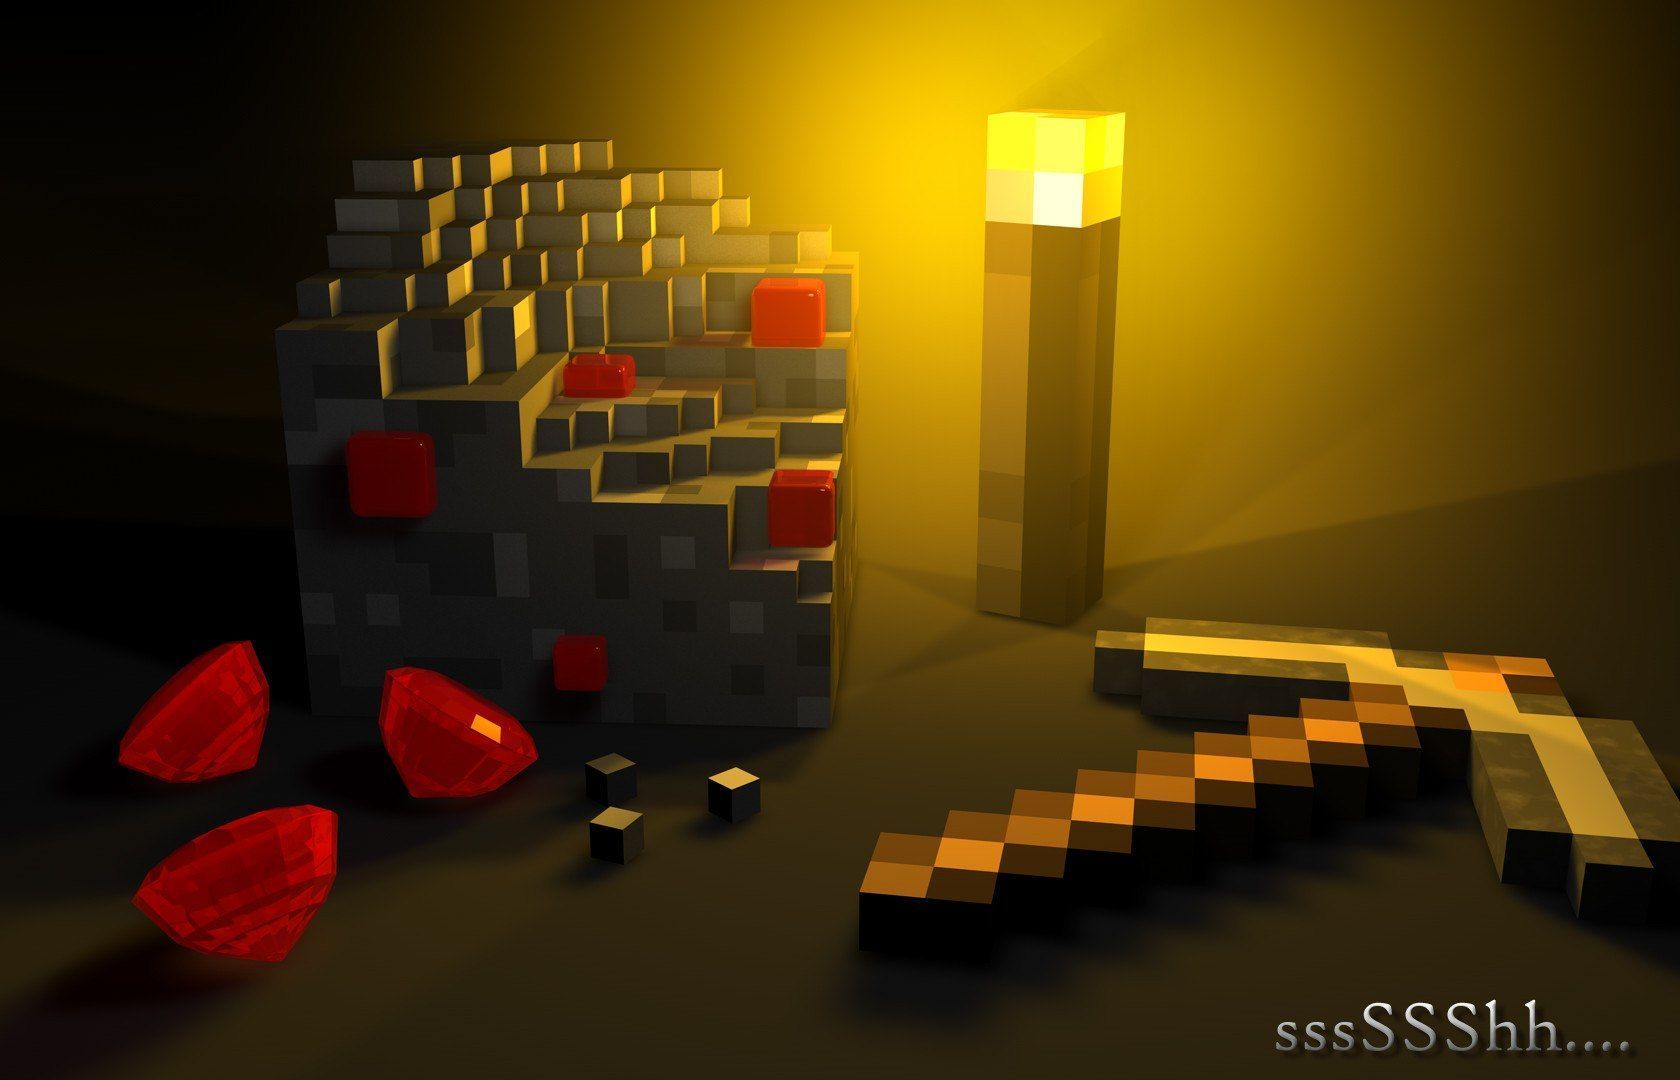 Minecraft wallpaper 1680x1080 - (#34930) - High Quality and ...